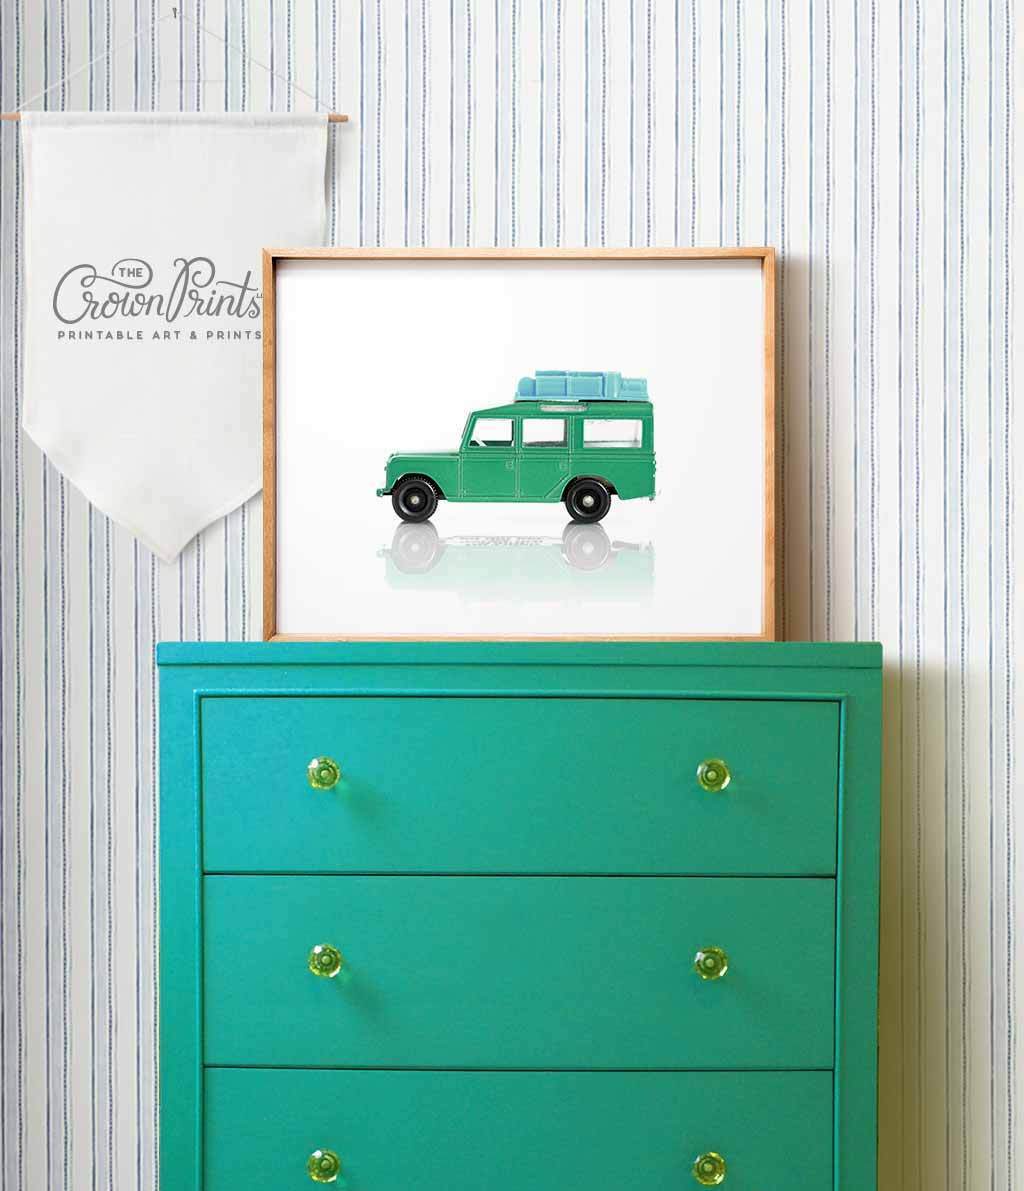 Toy Car: Land Rover Print - The Crown Prints